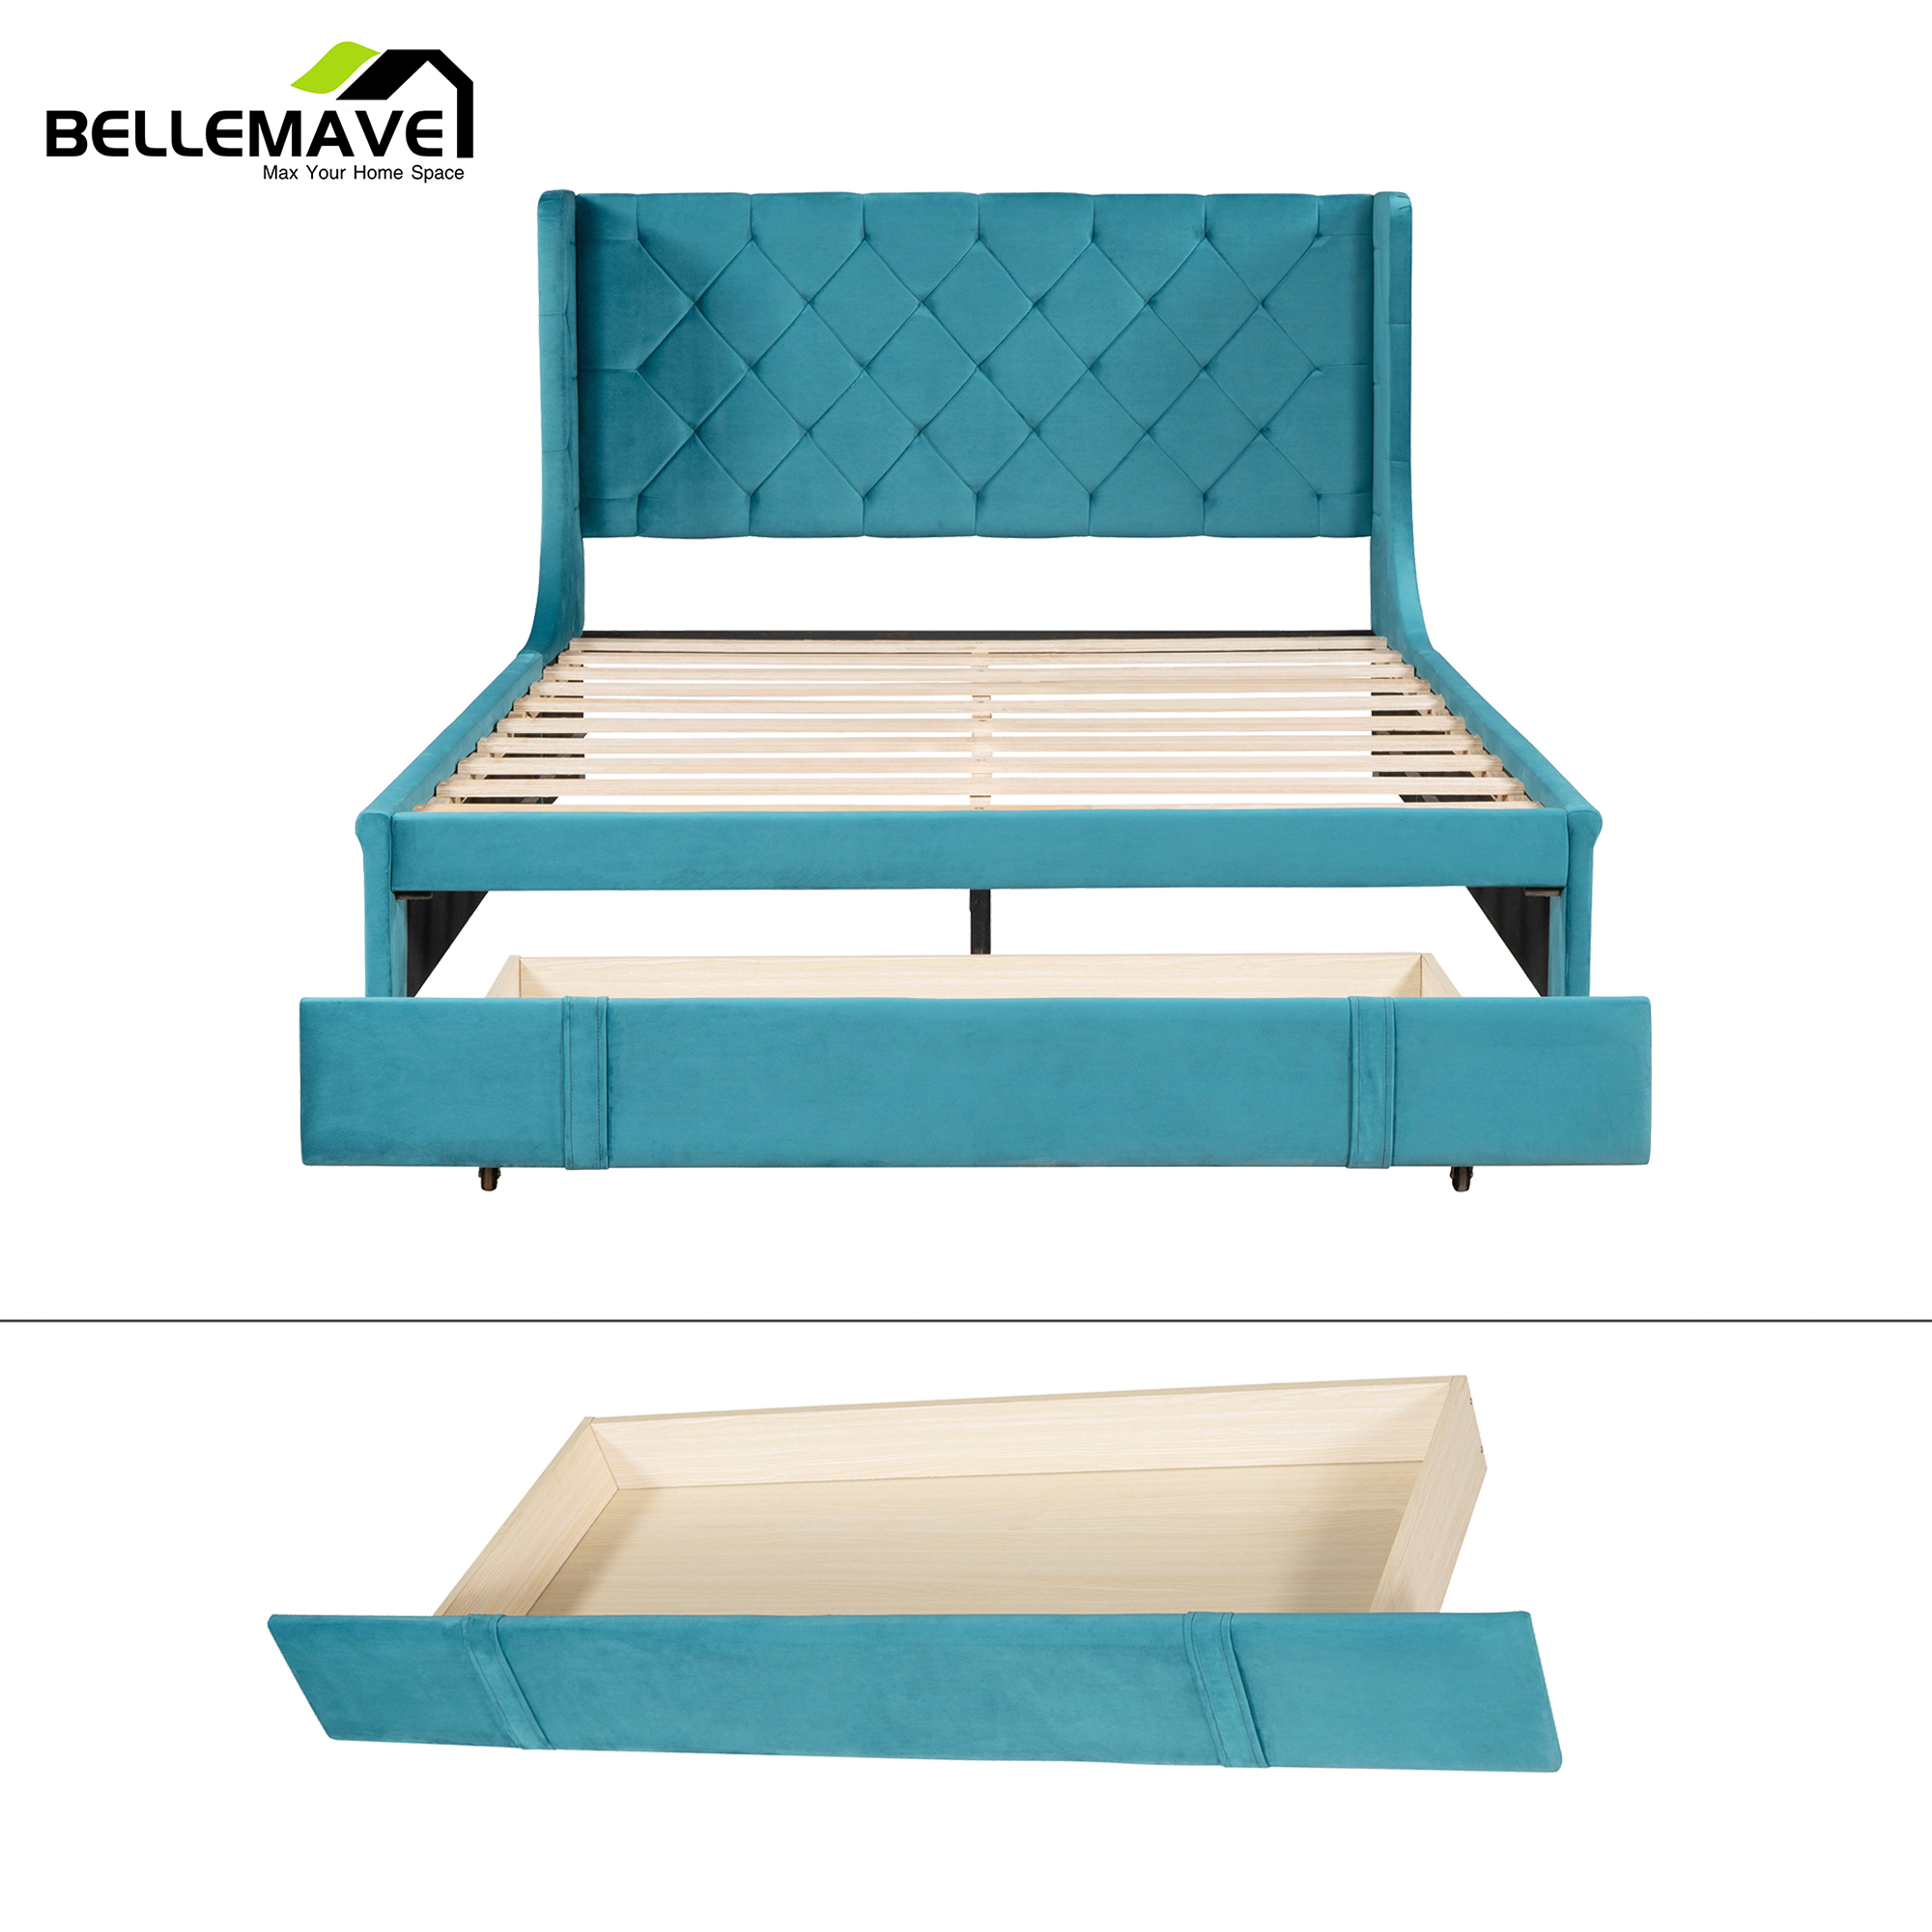 Bellemave Queen Upholstered Platform Bed Frame with Drawer, Storage Bed With Tufted Wingback Headboard, Blue - image 4 of 7